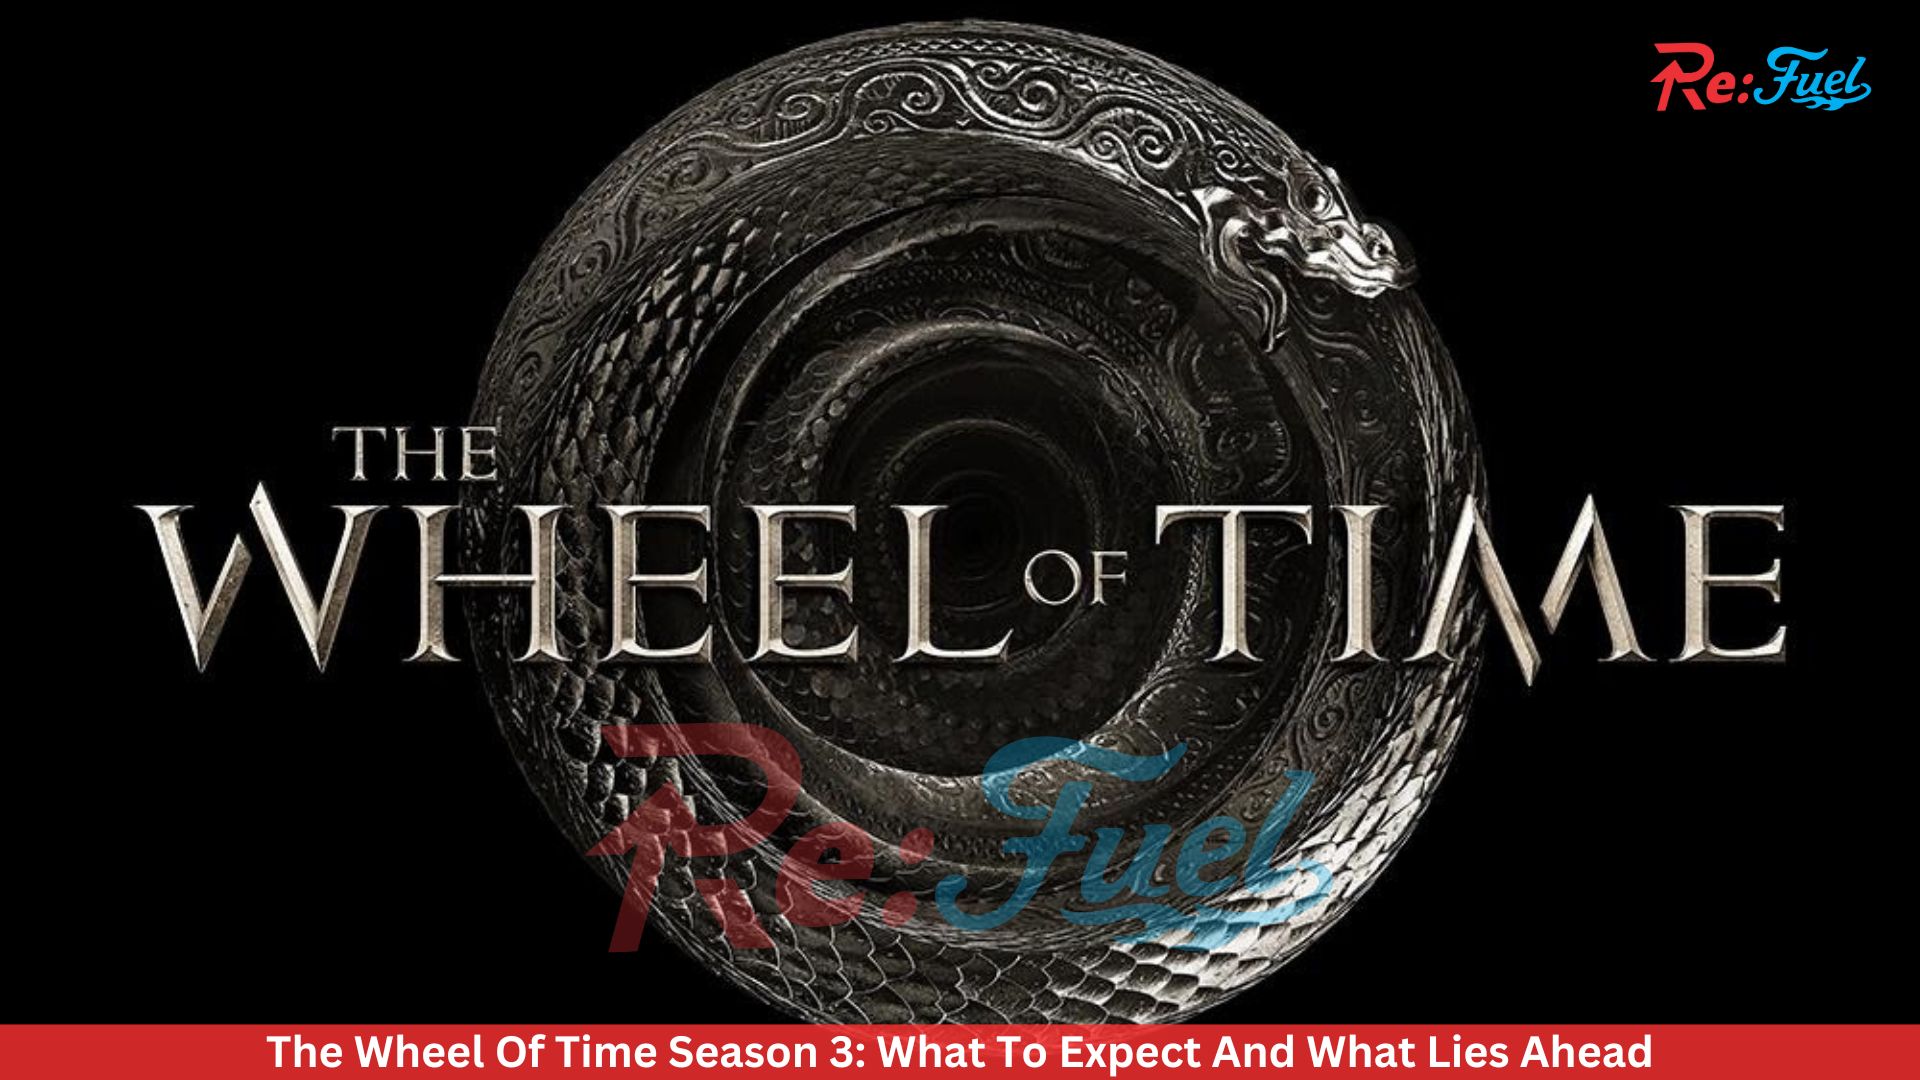 The Wheel Of Time Season 3: What To Expect And What Lies Ahead